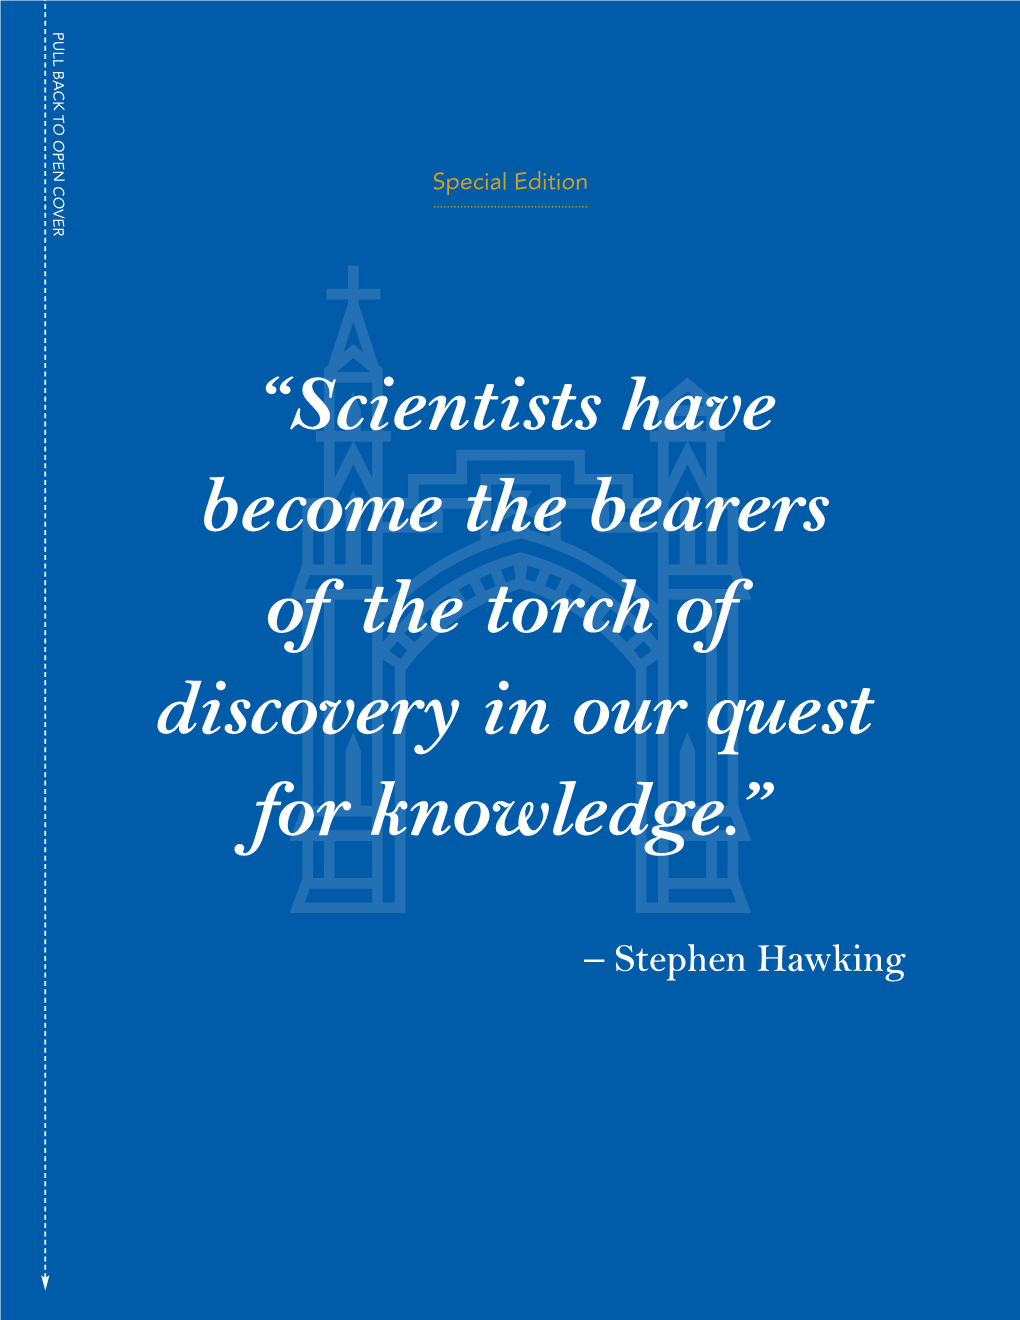 Scientists Have Become the Bearers of the Torch of Discovery in Our Quest for Knowledge.”